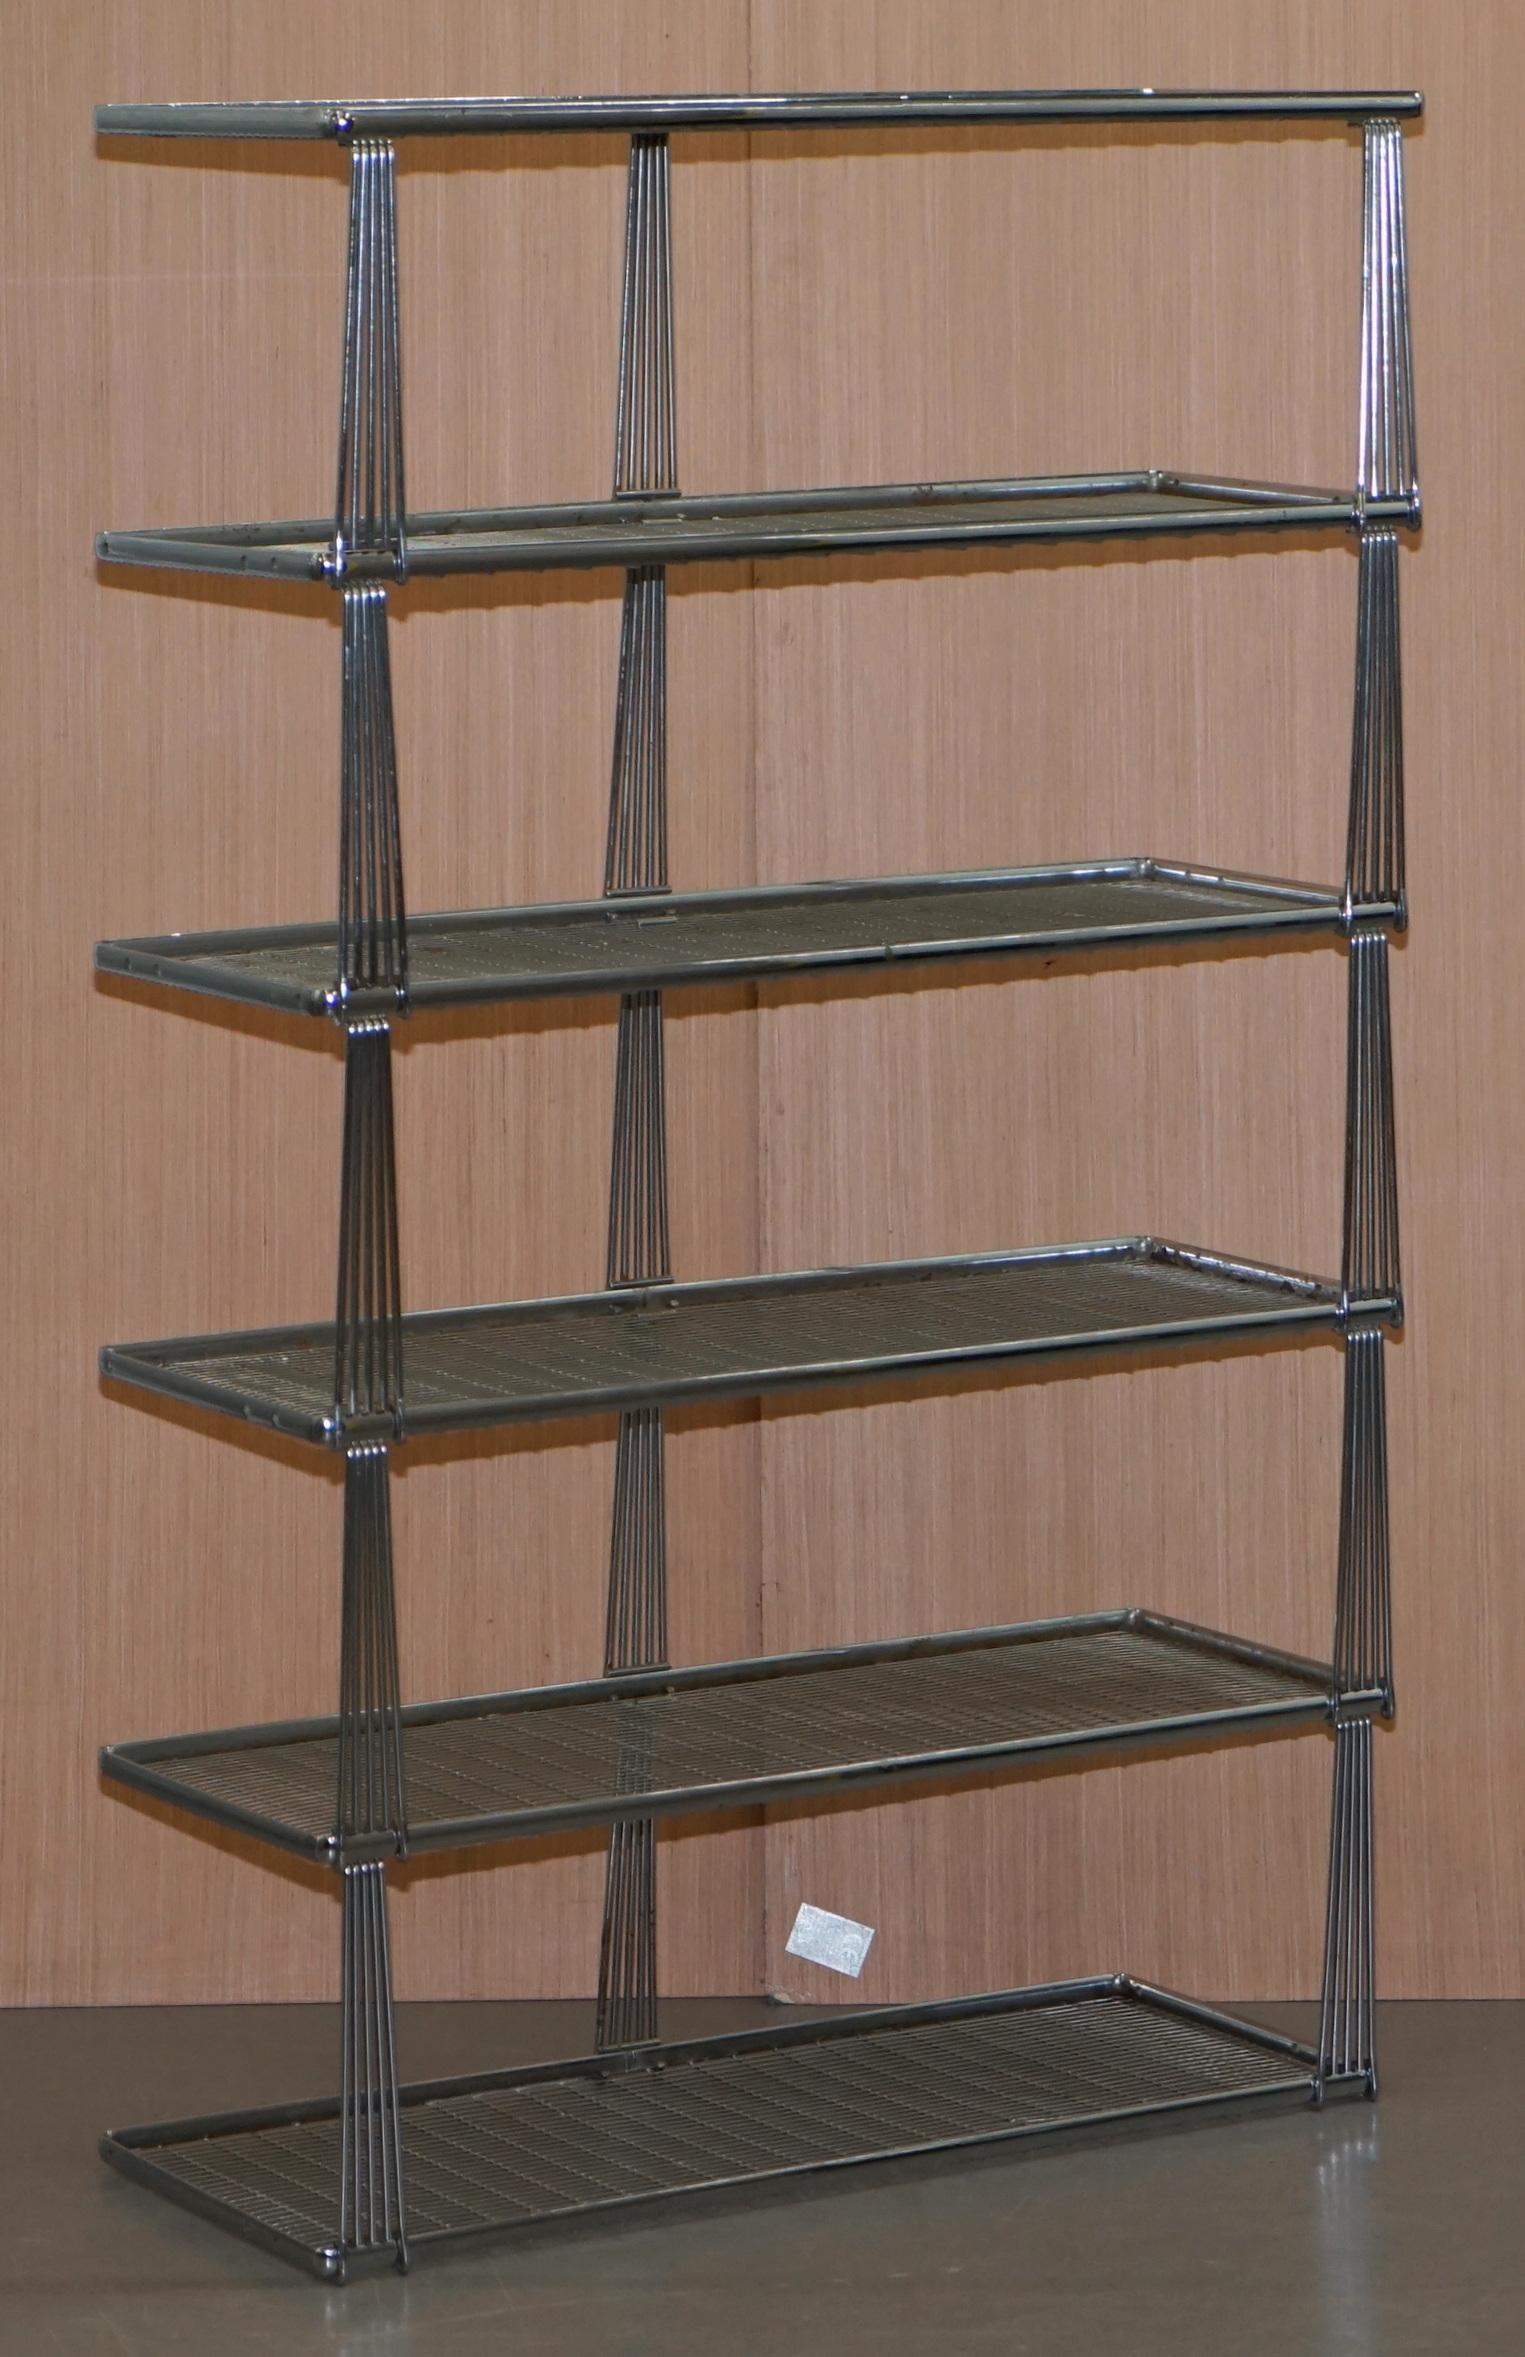 We are delighted to offer for sale this very rare suite of 1960s chrome-plated Beanstalk Shelving LTD modular height adjustable racking

A very versatile and utilitarian suite, you can change the height of these as you wish, you can have one main